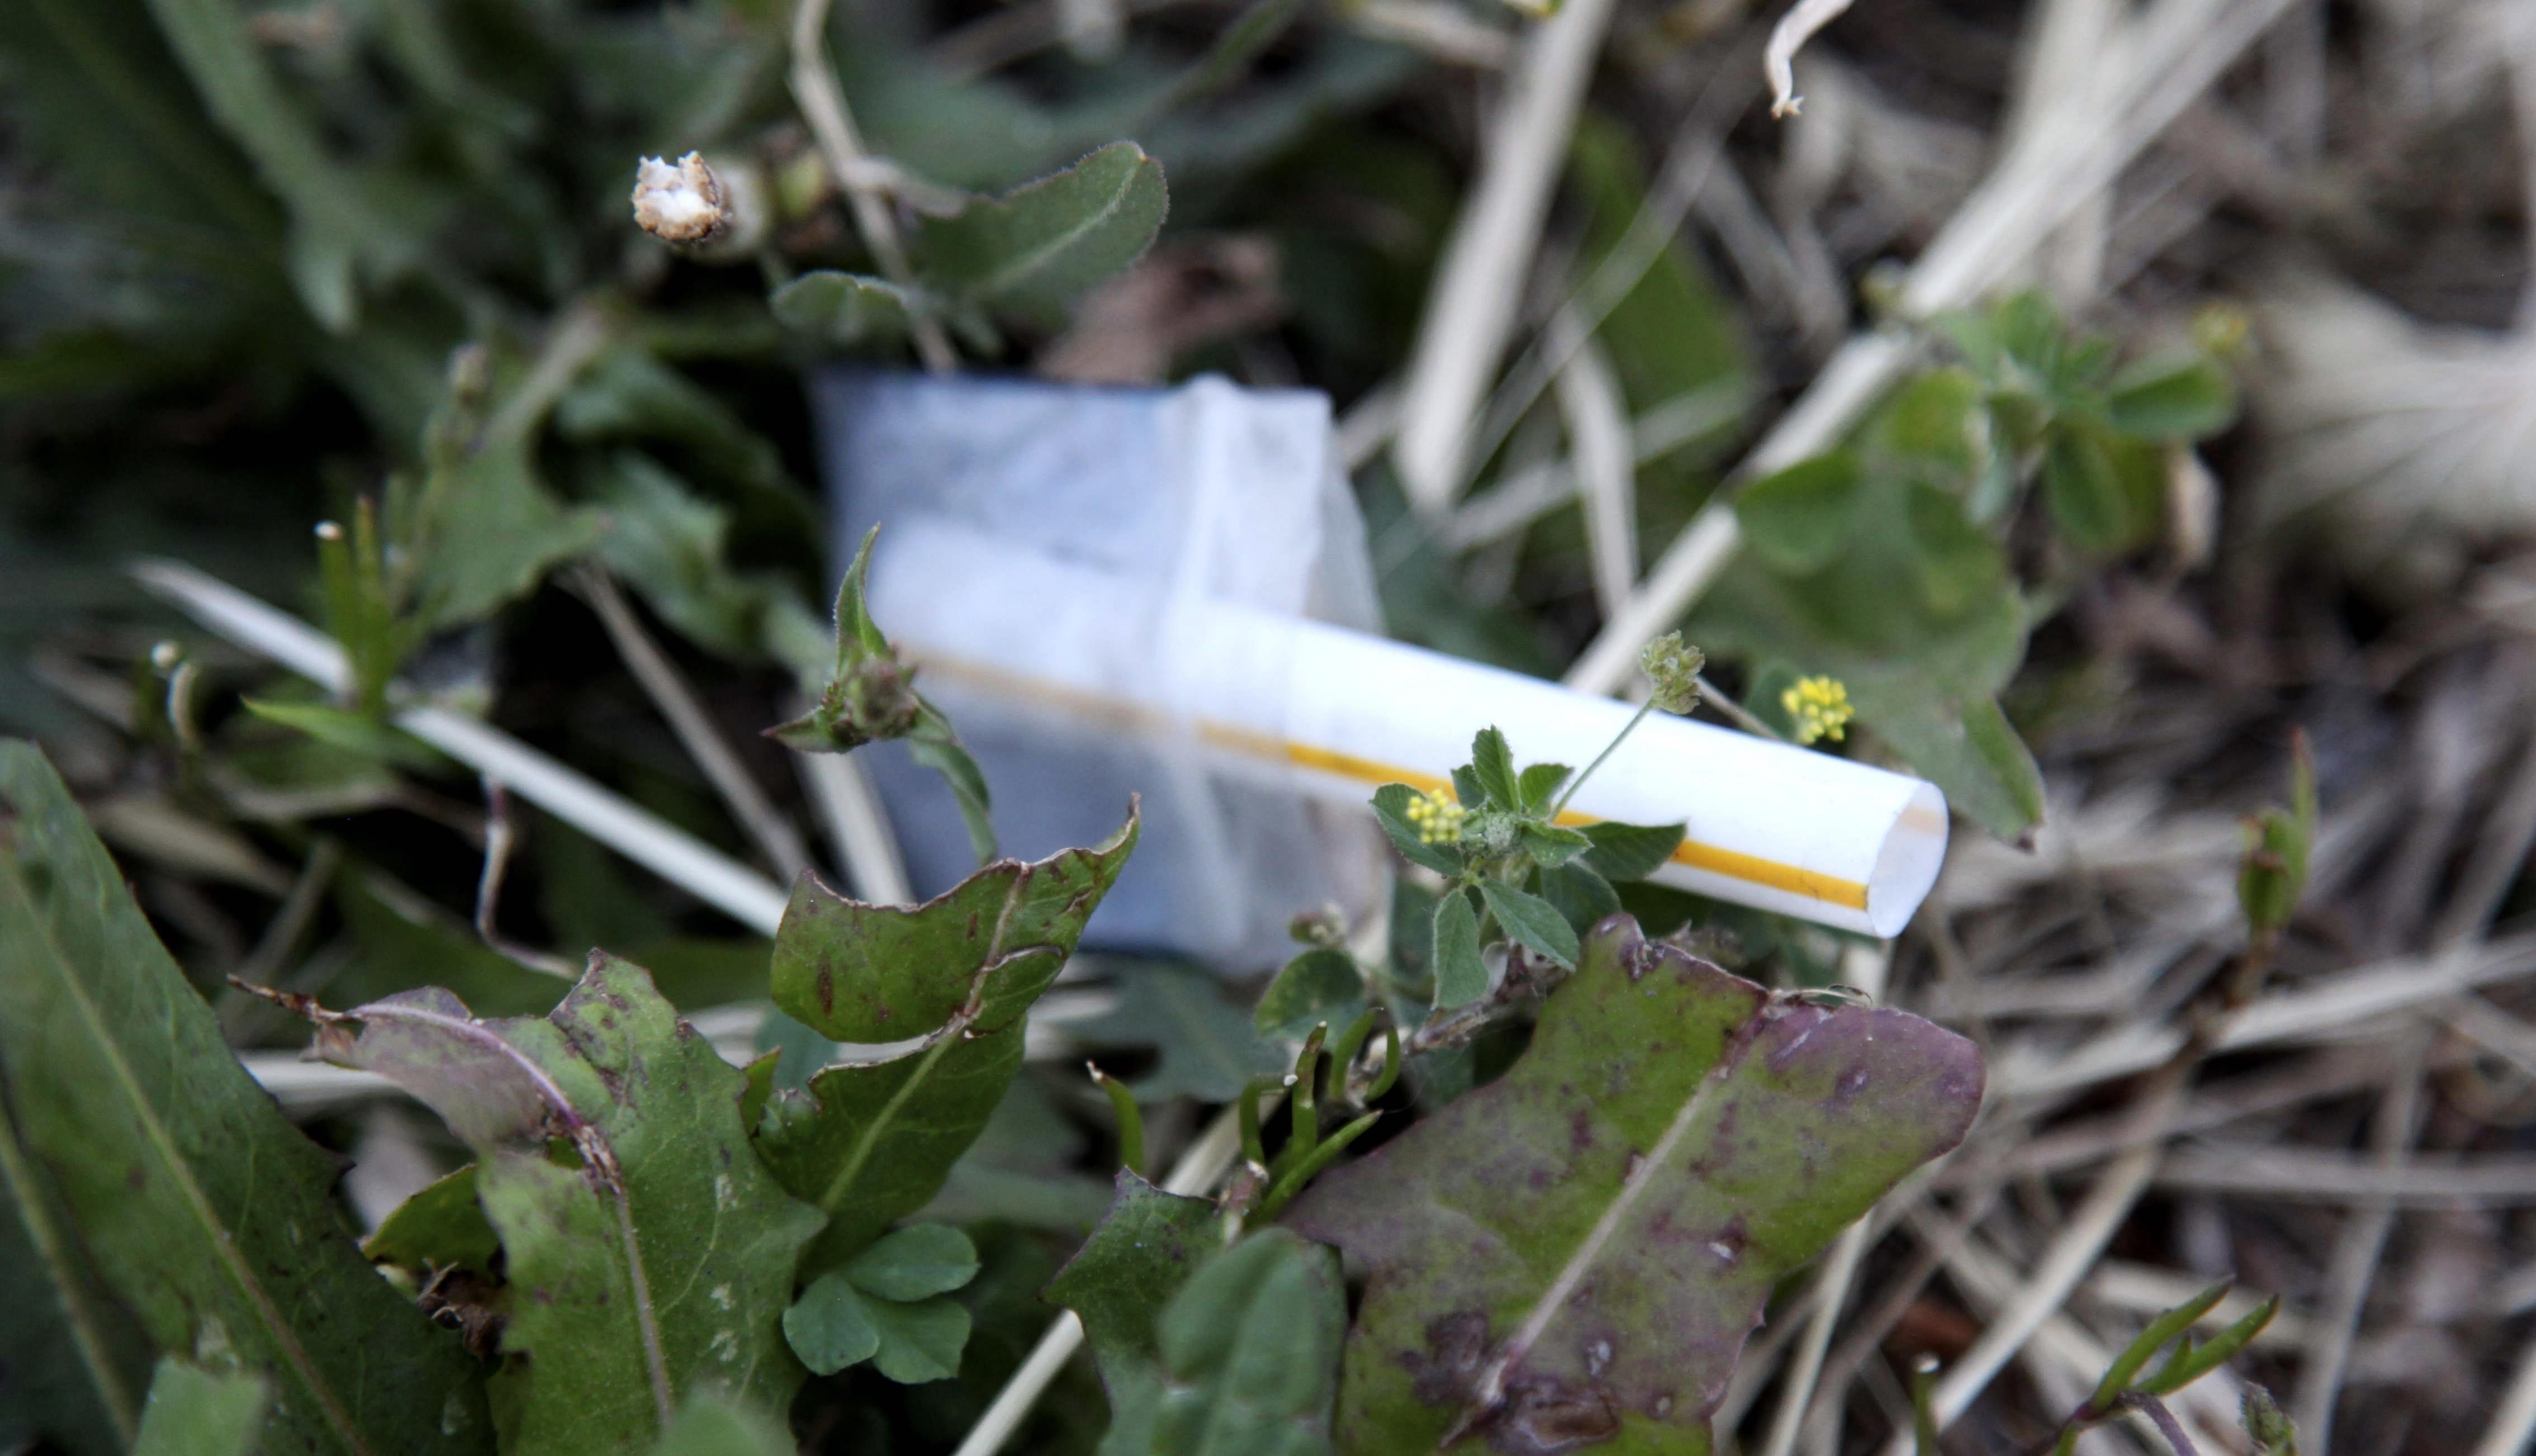 In a June 5, 2012 photo, a heroin pouch lays next to a sidewalk on Chicago's Homan Avenue.